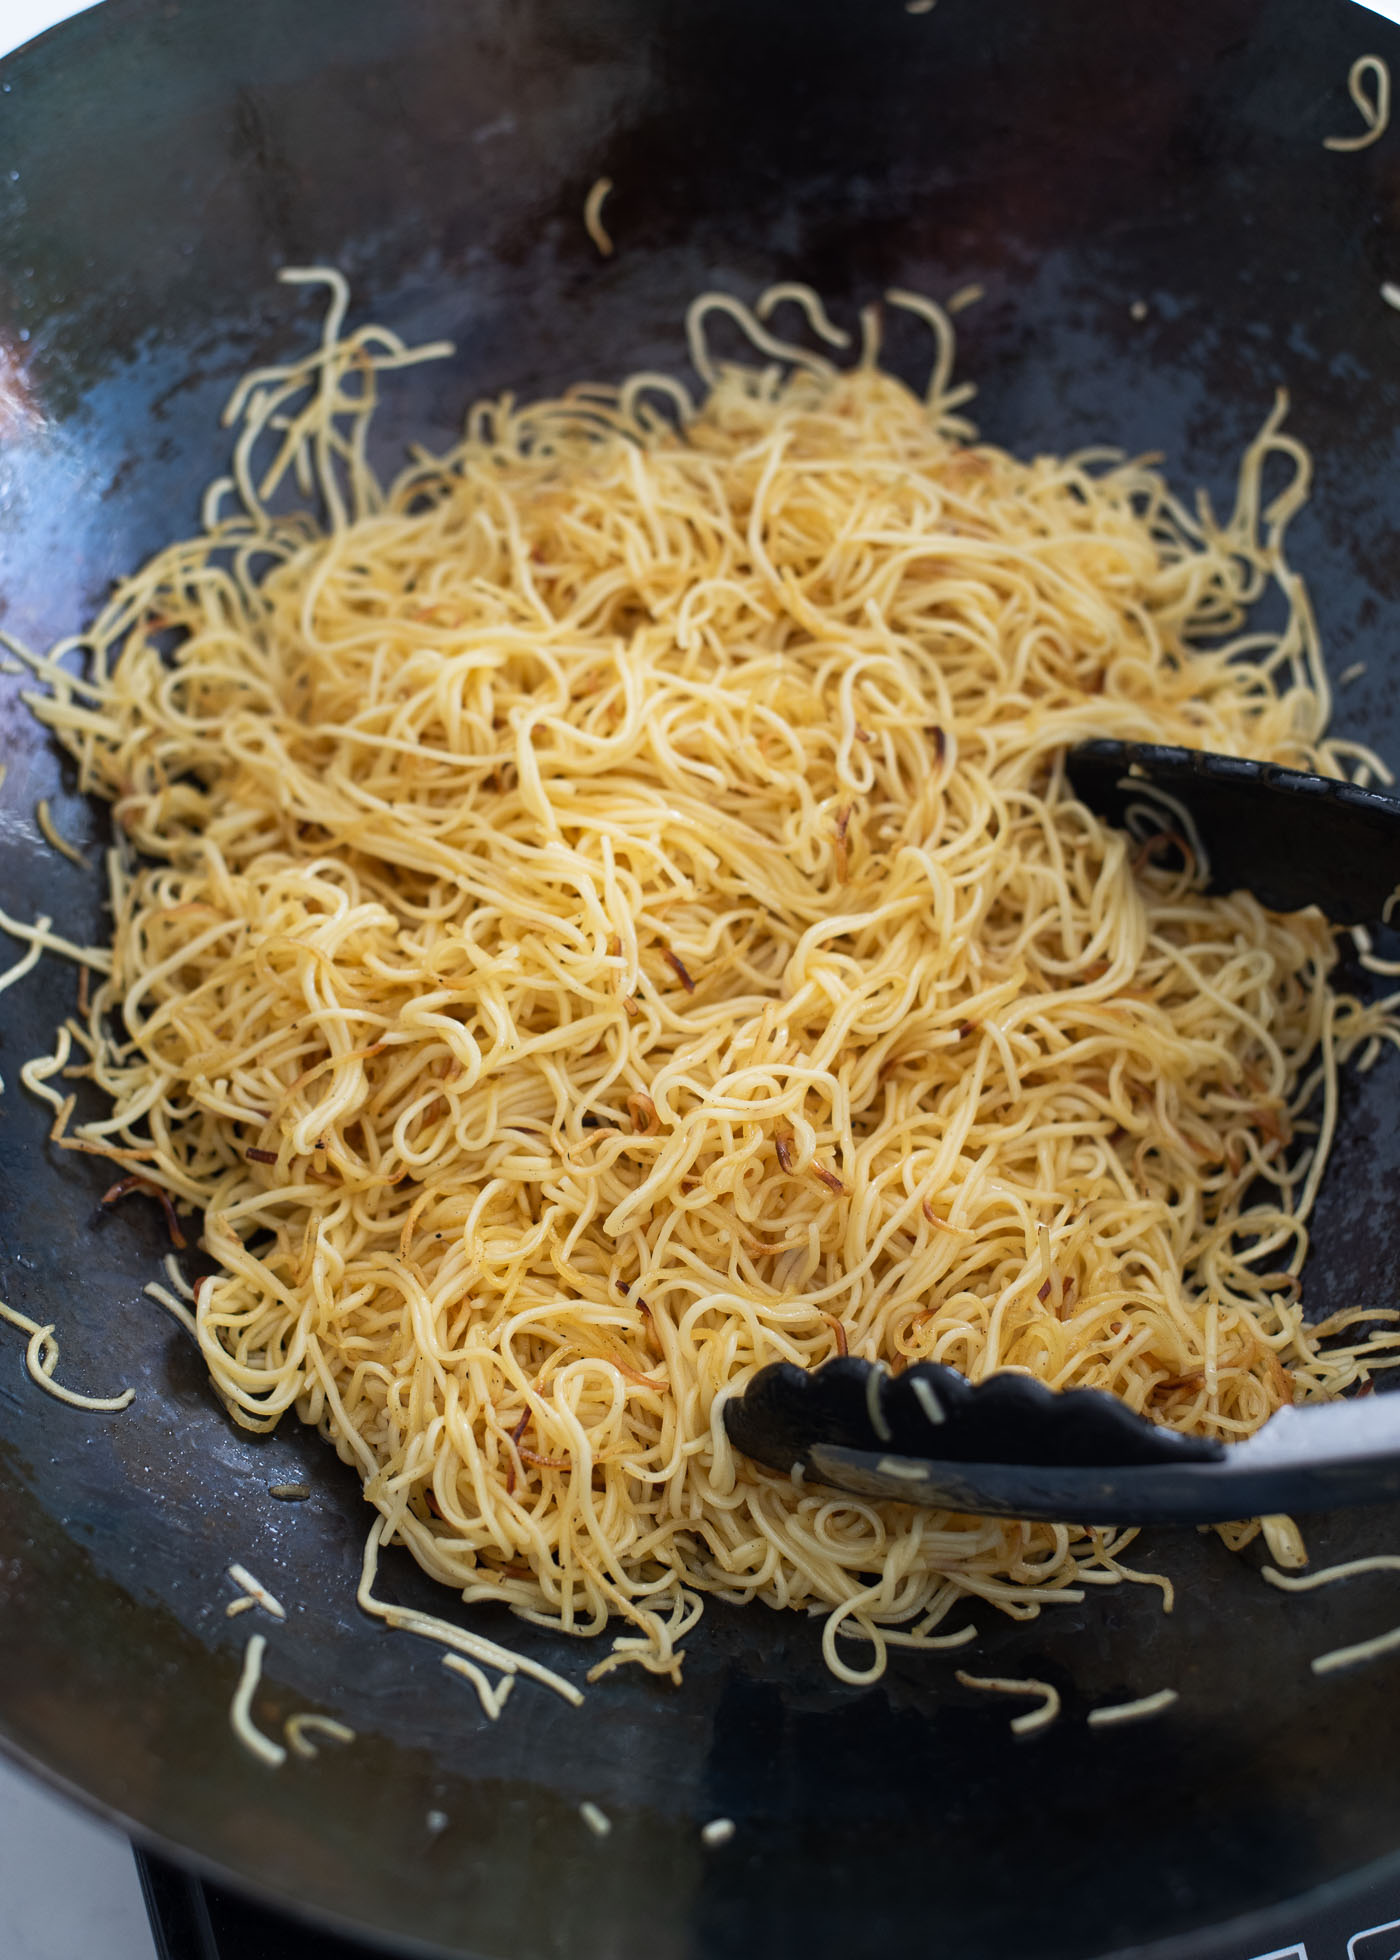 Kitchen tongs are stir frying the egg noodles to cook evenly.